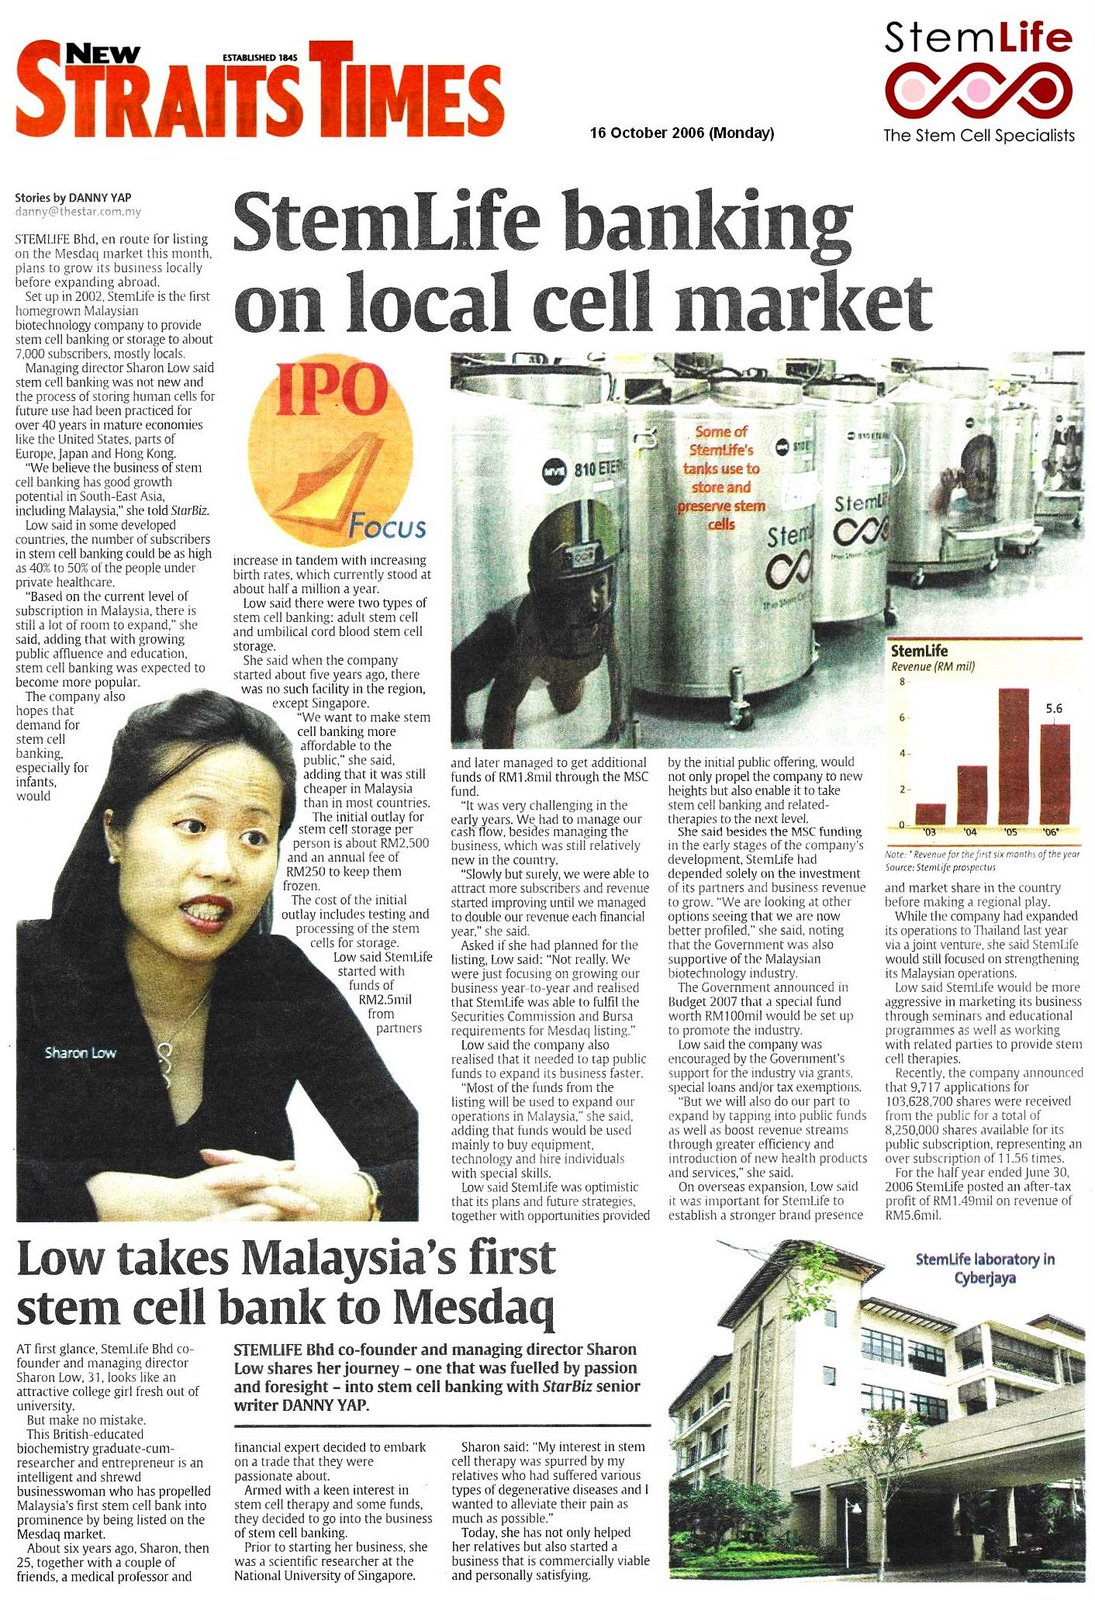 [NST_StemLife%20Banking%20on%20Local%20Cell%20Market_16102006.jpg]